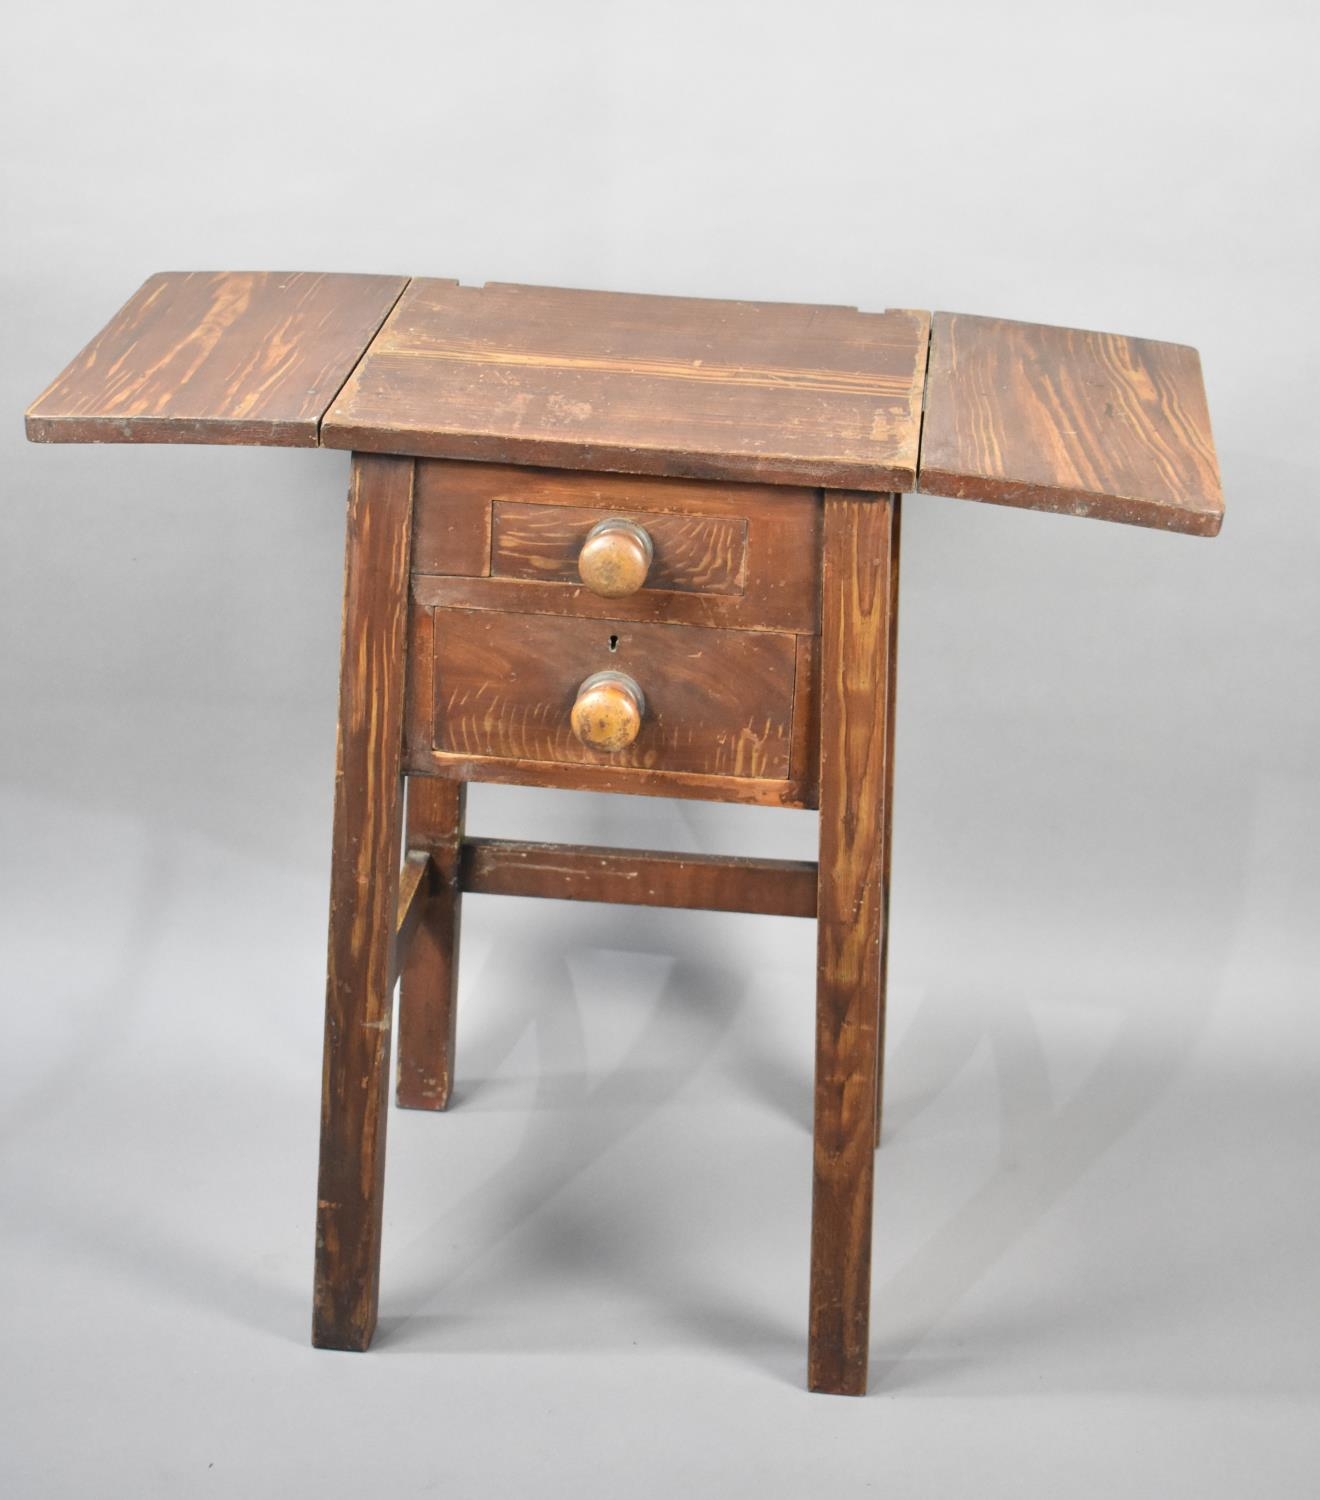 An Early/Mid 20th Century Stained Pine Scumble Glazed Style Drop Leaf Work Table with one Long and - Image 3 of 3